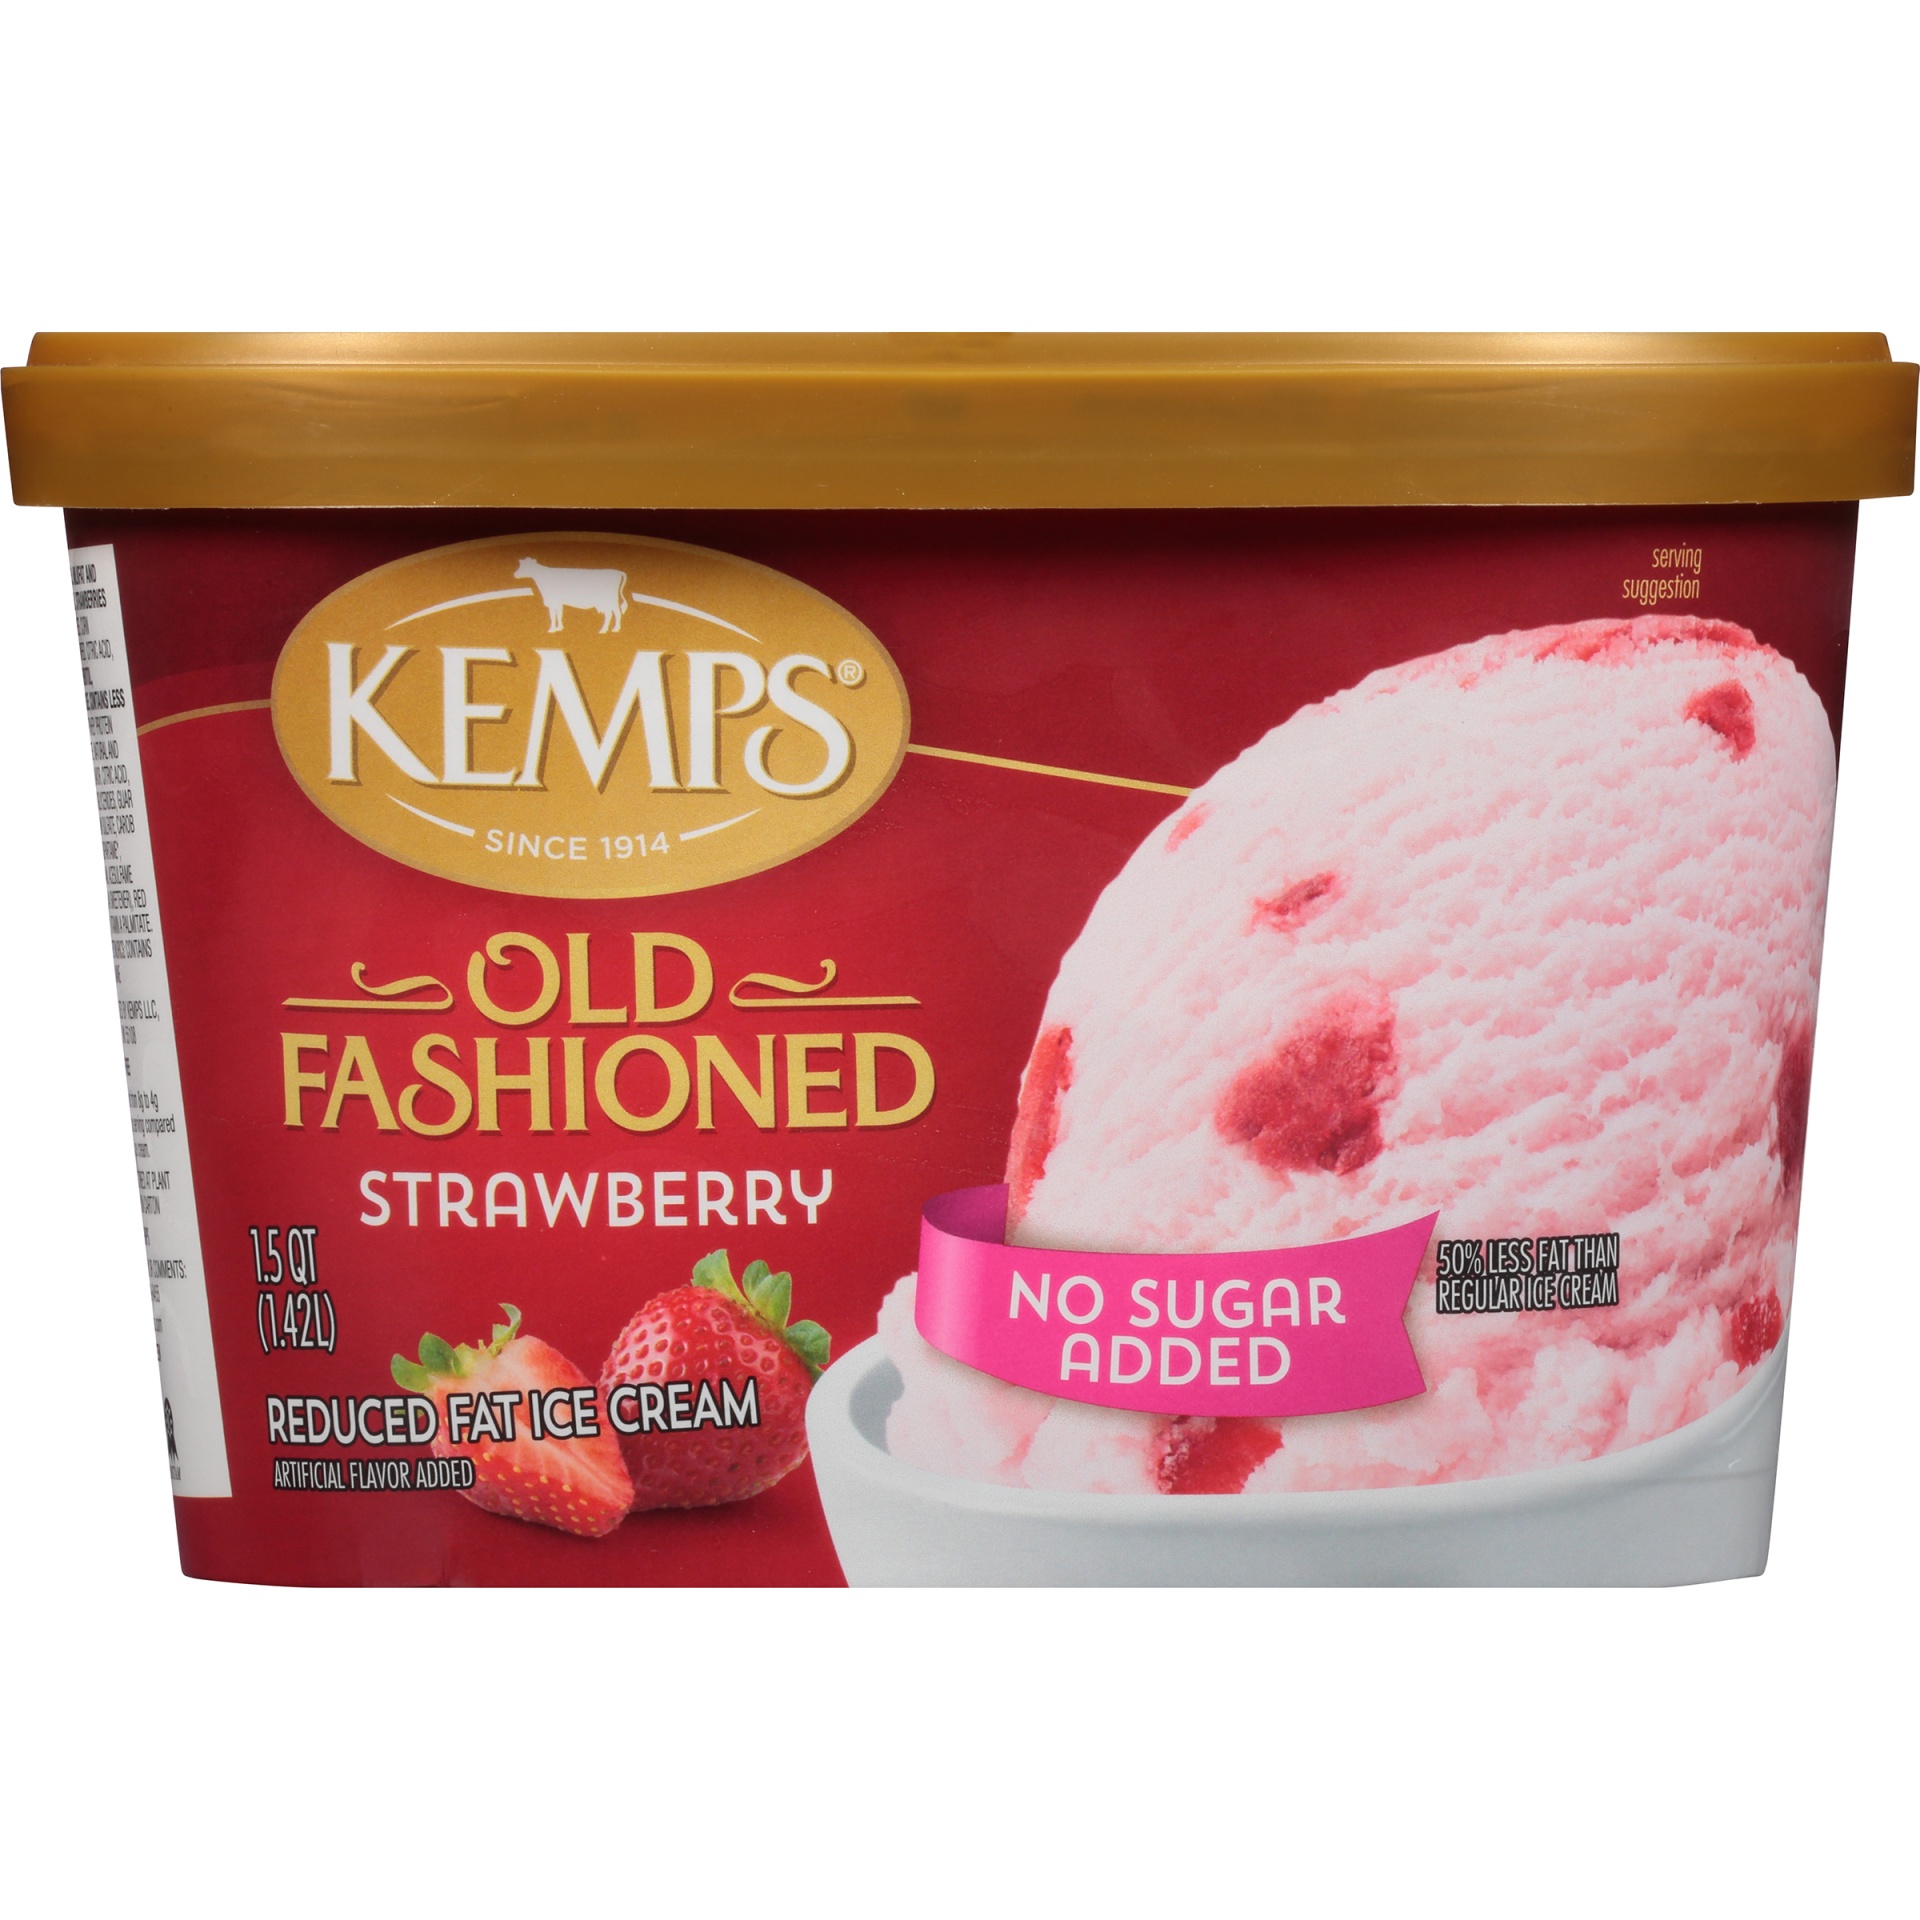 slide 6 of 8, Kemps No Sugar Added Old Fashioned Strawberry Reduced Fat Ice Cream, 1.5 qt